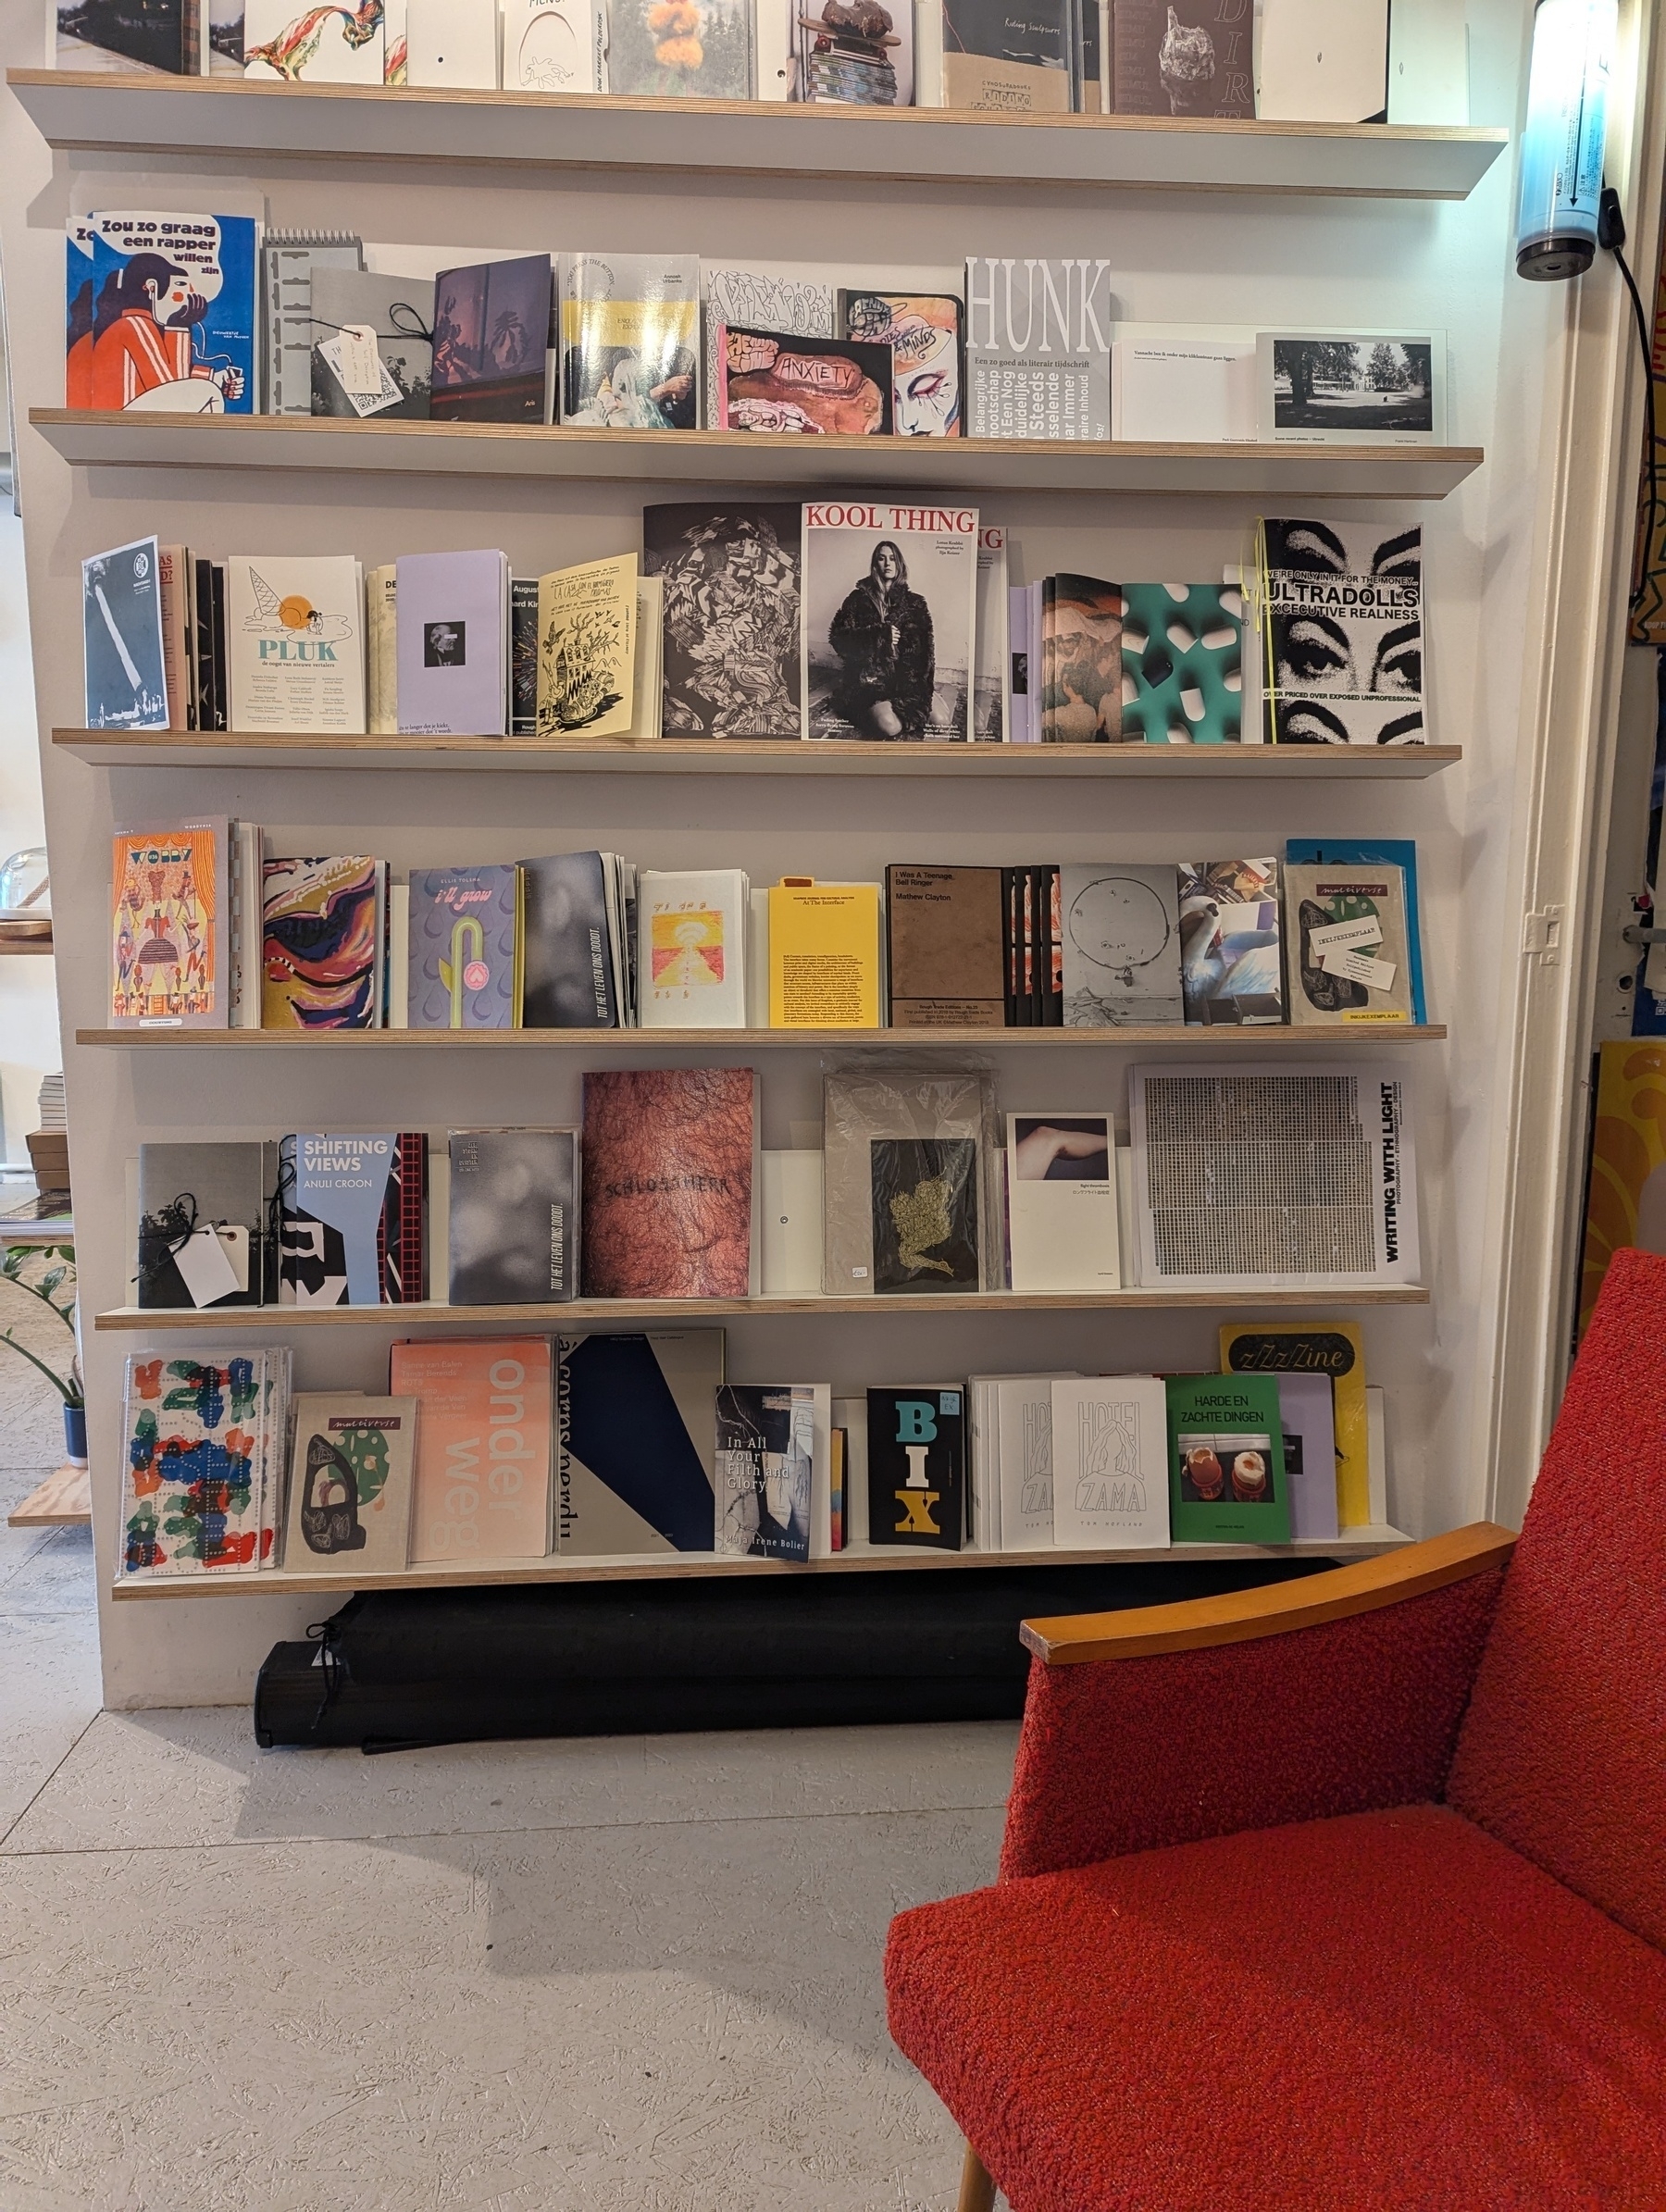 Book shelf in a book store. Colourful (maga)zines that build a nice mess. It's a lot of local and some international work, queer, artsy, lots of street photography. There's a cozy armchair in the front 